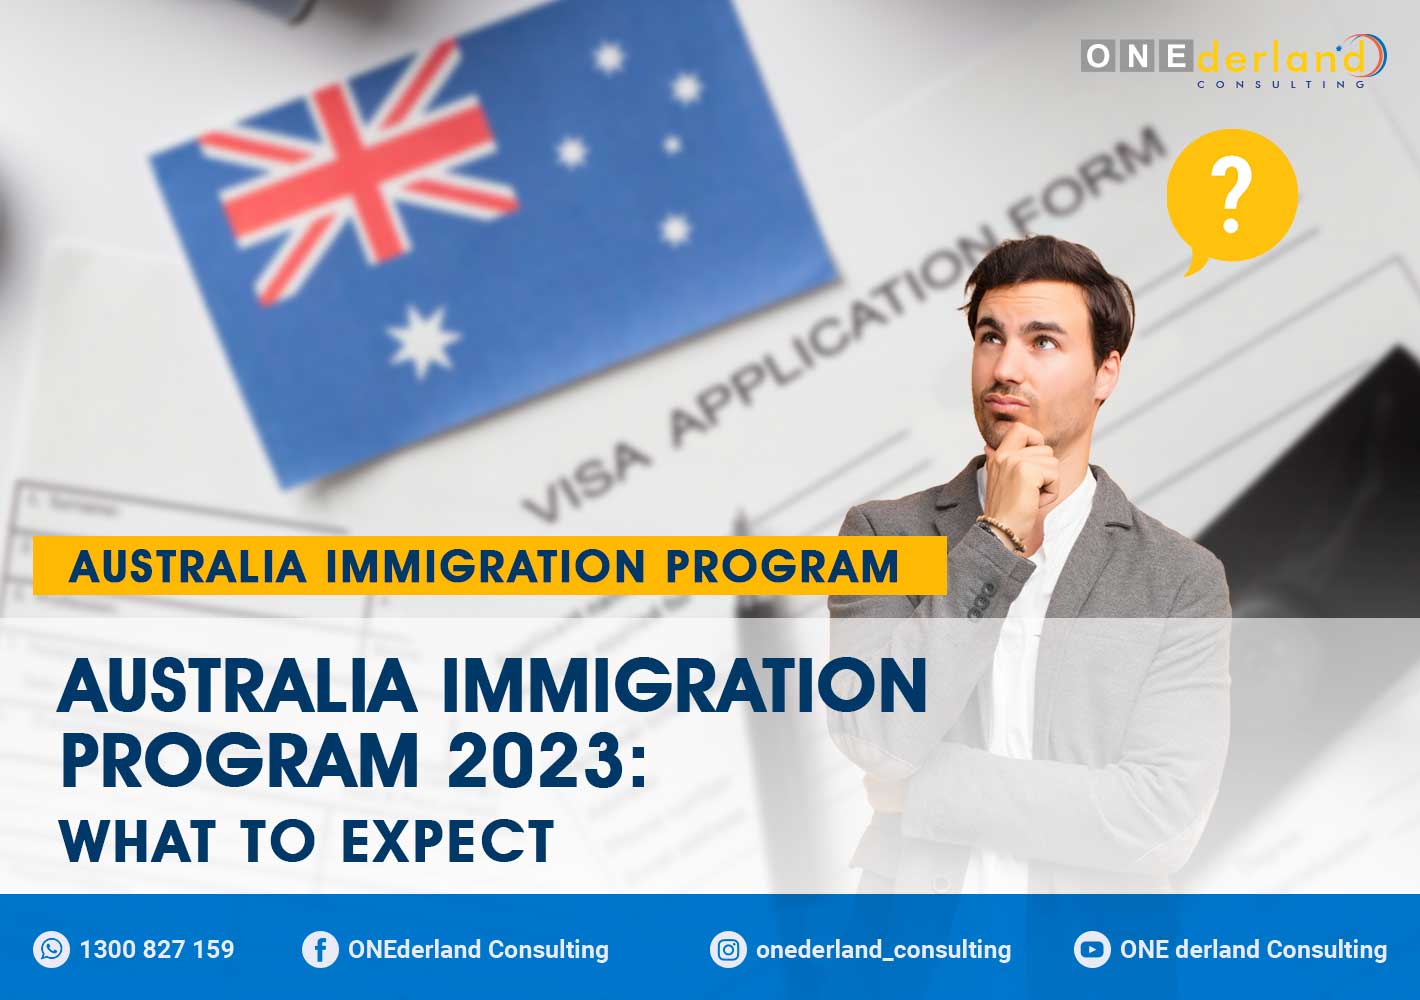 What Can We Expect from the Australia Immigration Program in 2023?